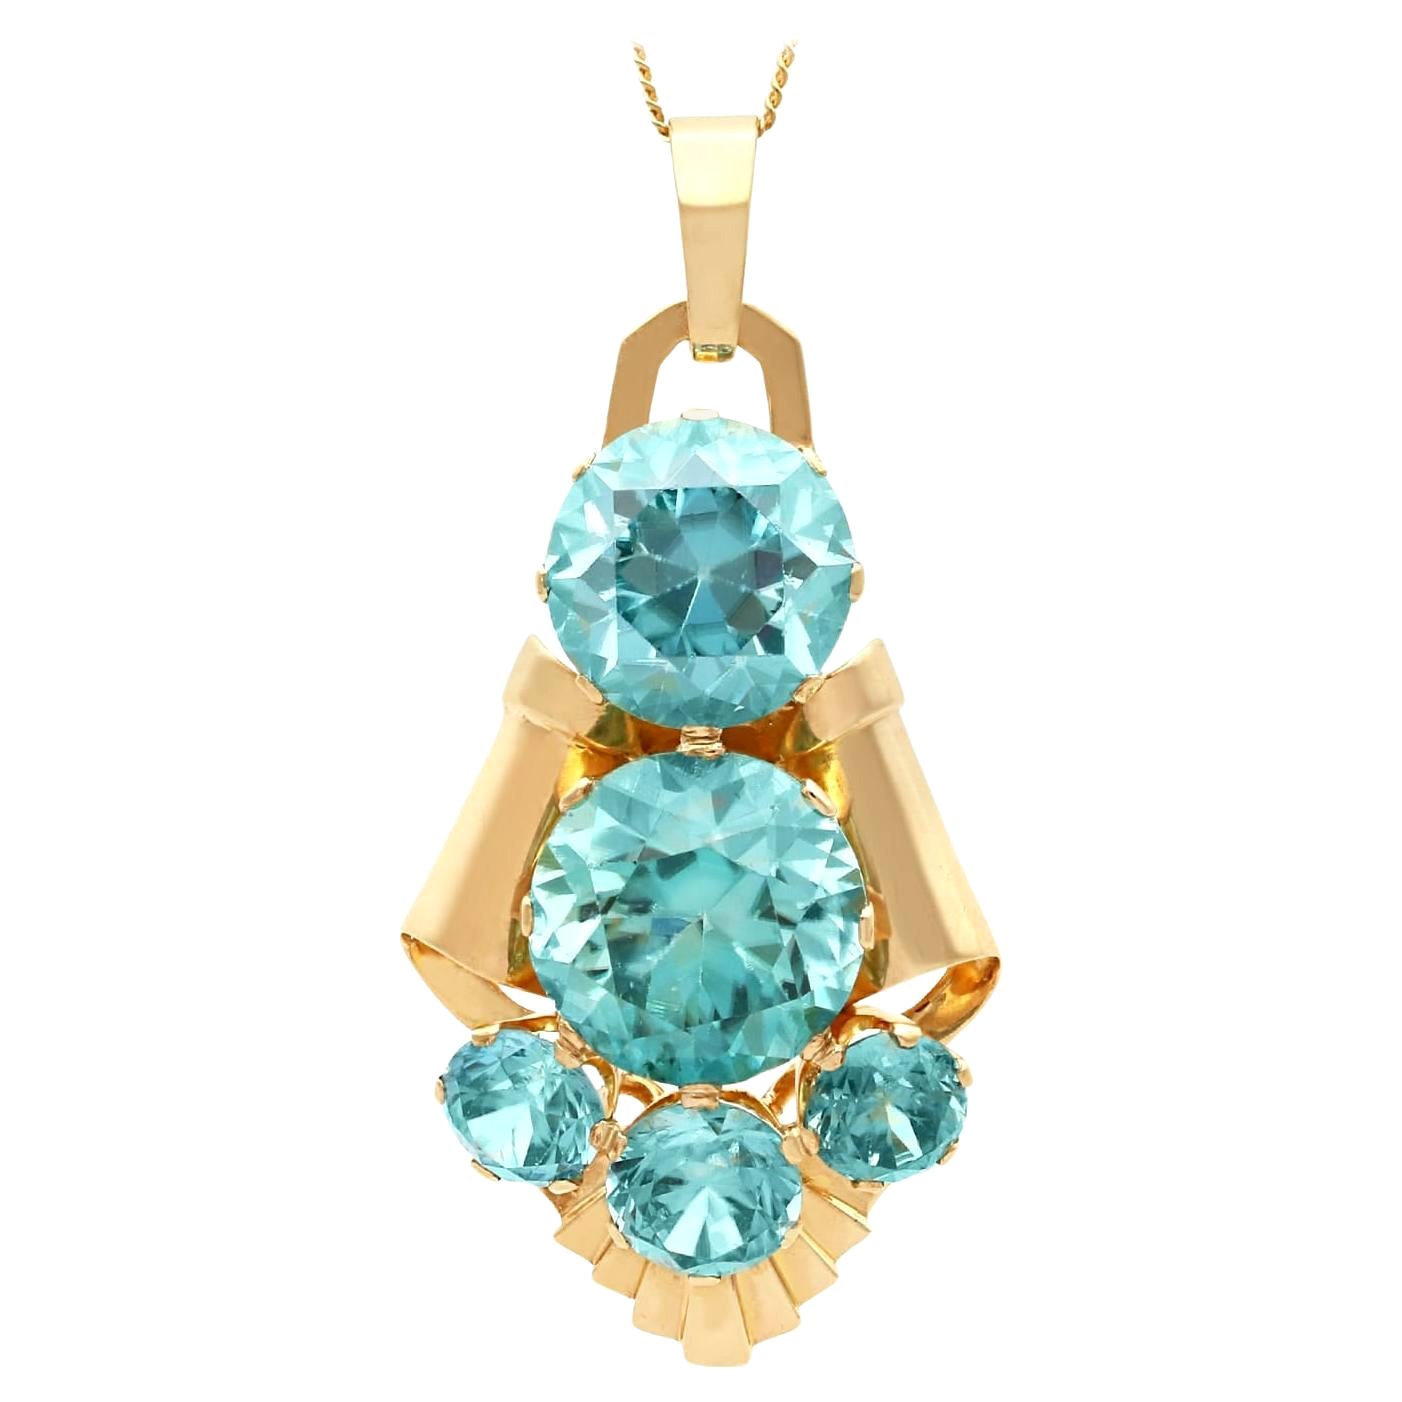 1940s Vintage 34.92 Carat High Zircon and 9k Yellow Gold Pendant / Brooch For Sale